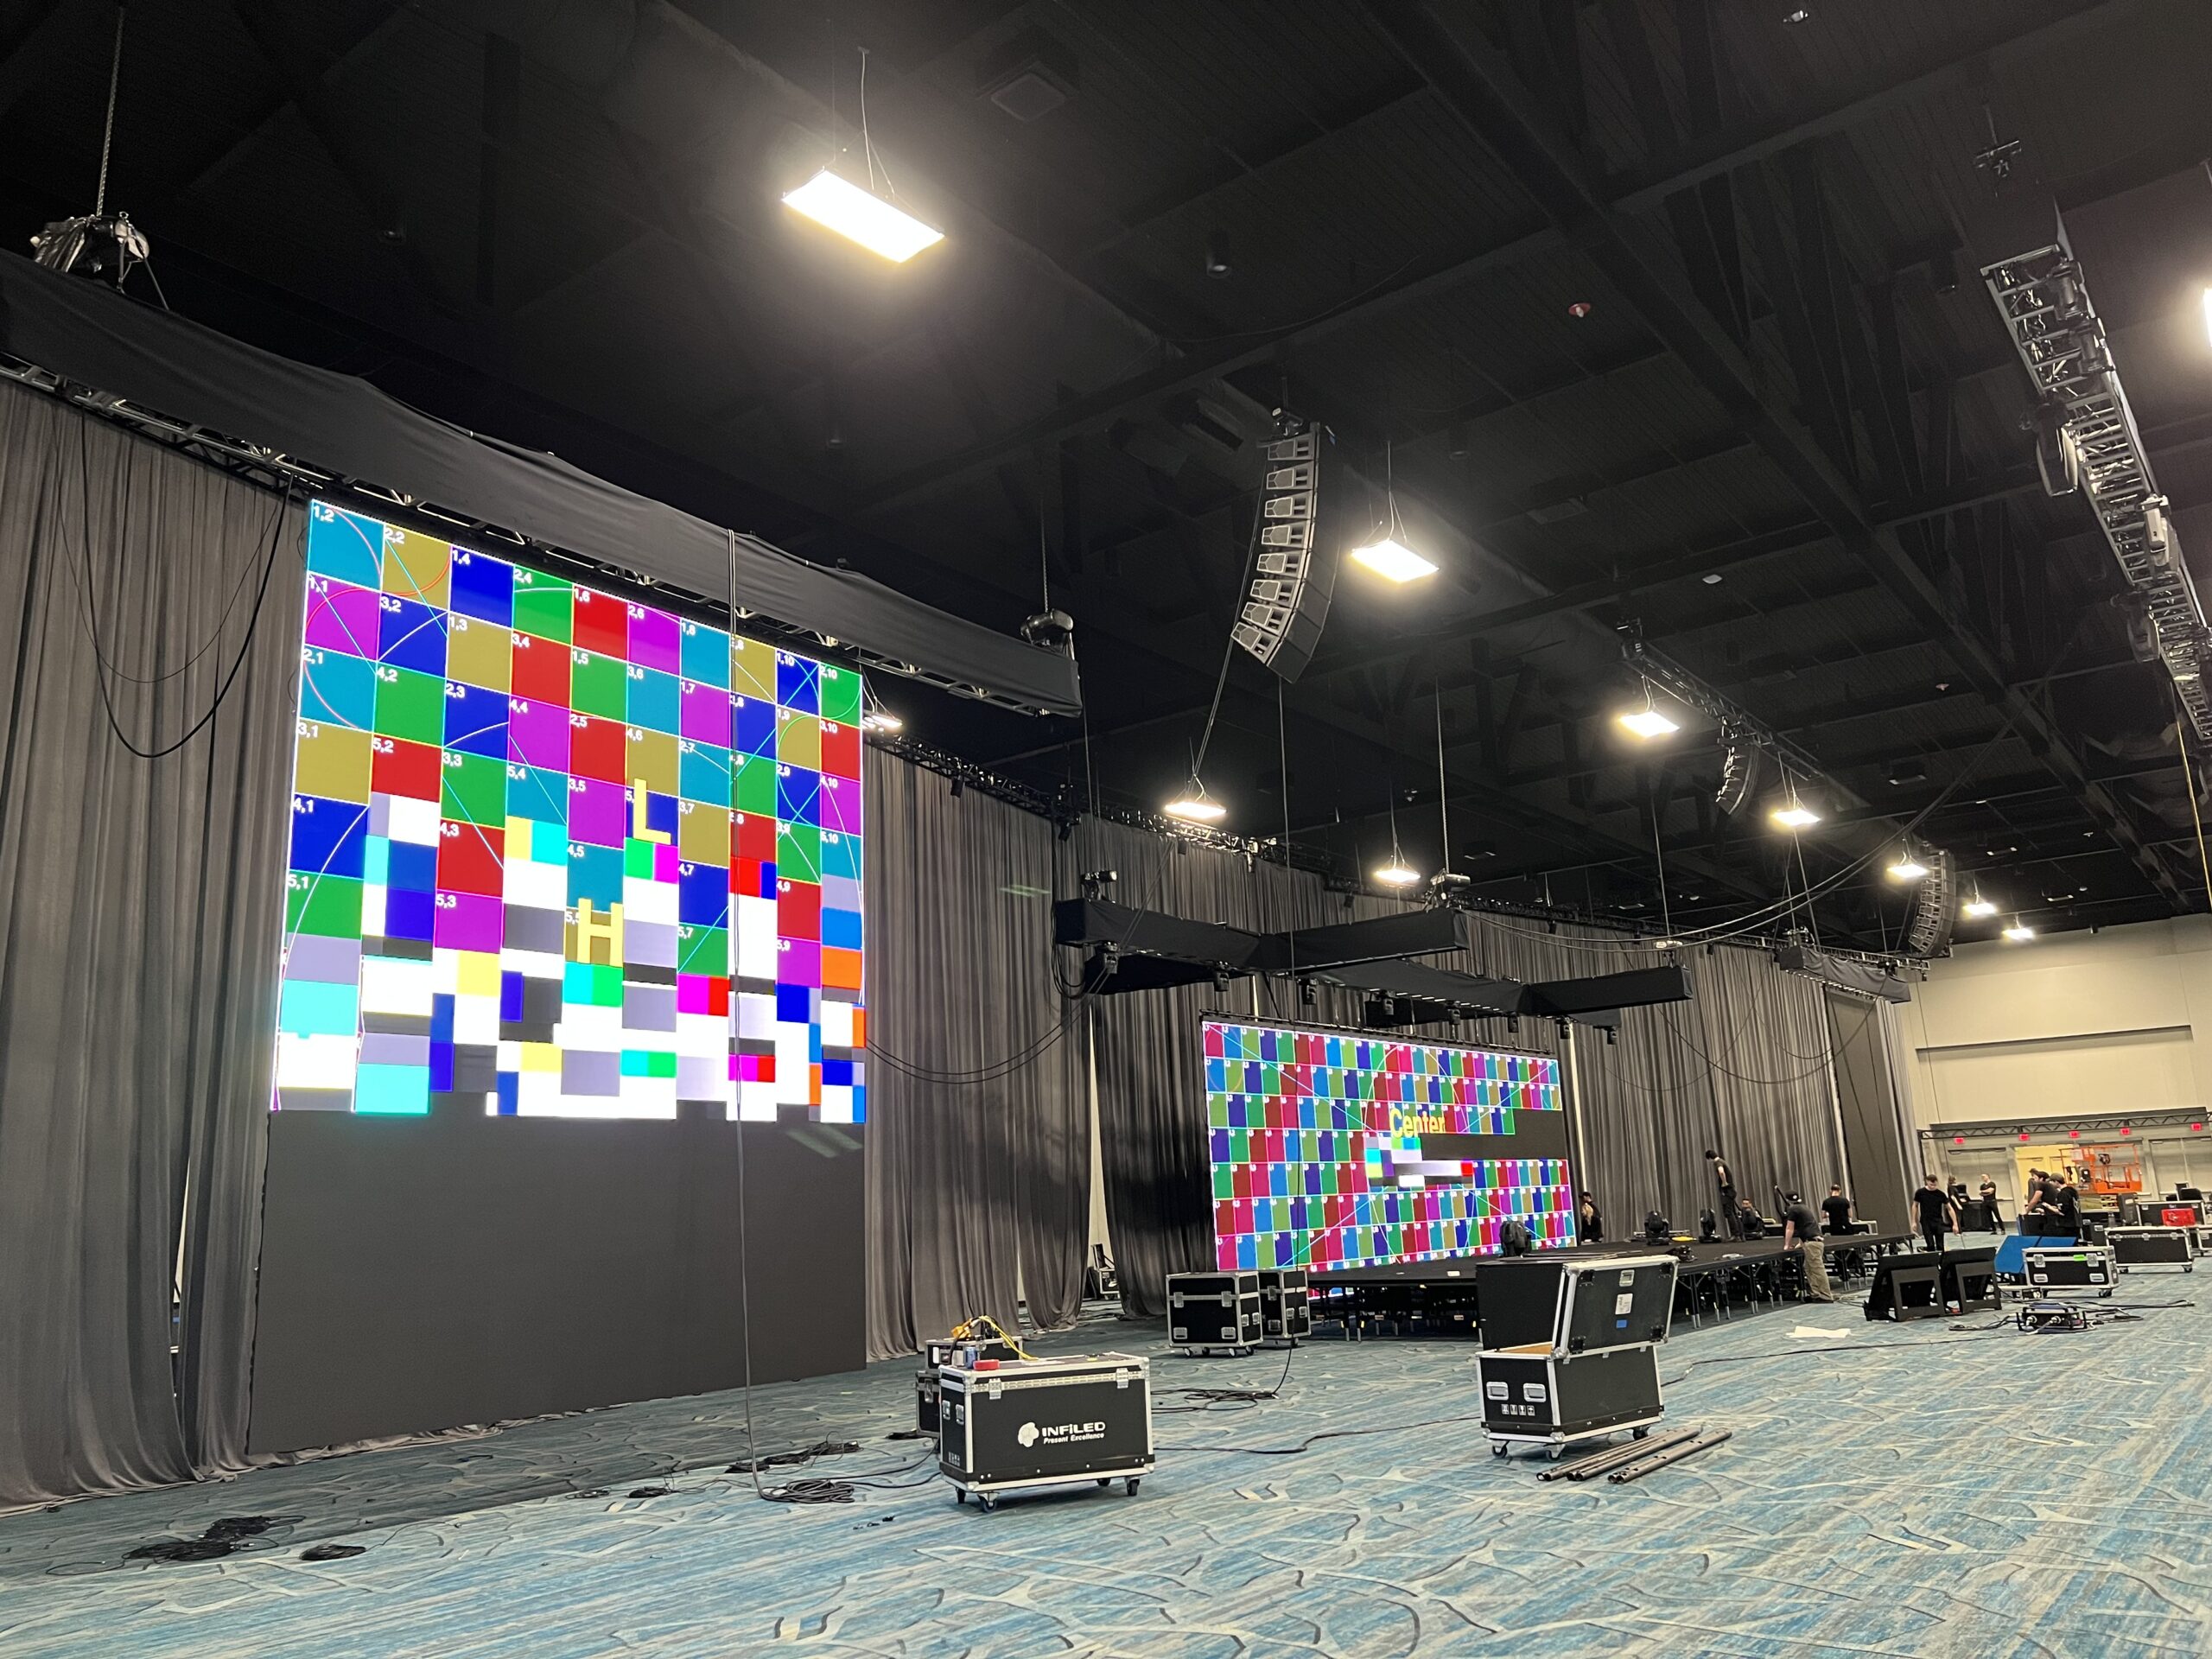 A well-lit event space with a large LED screen displaying colorful test patterns, surrounded by black curtains and event equipment.